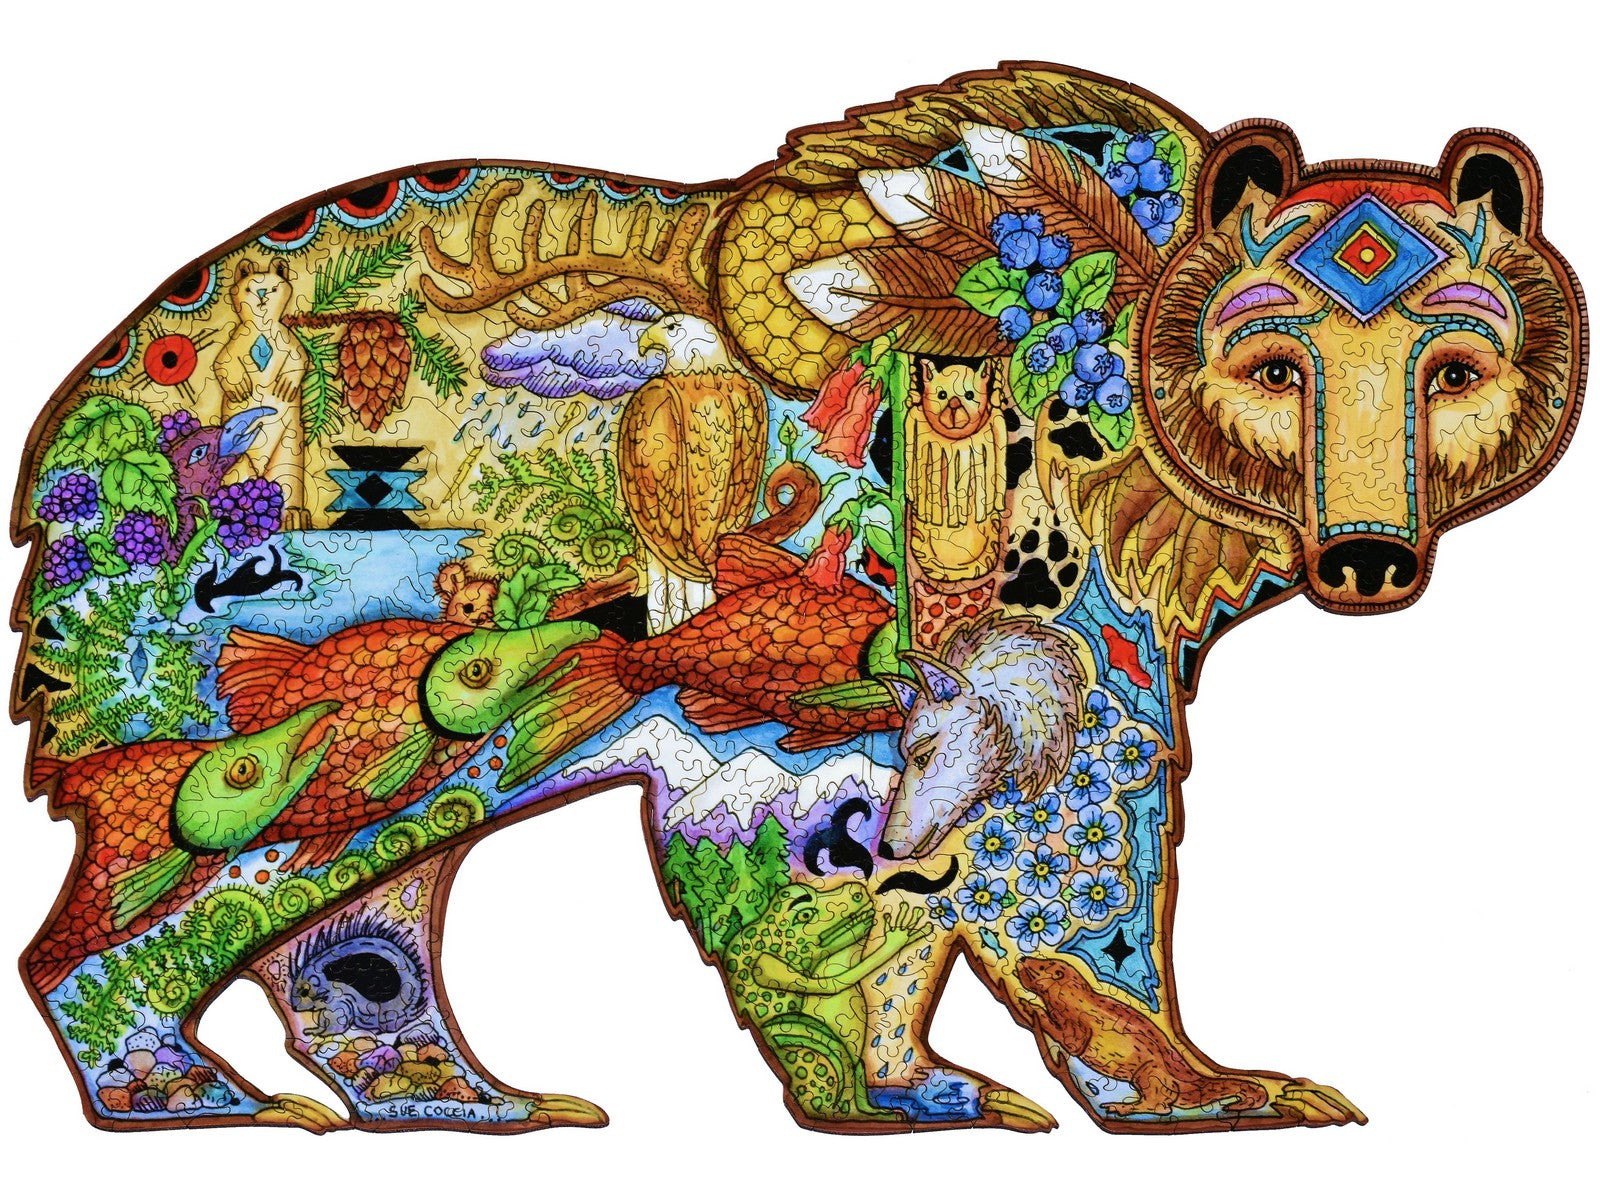 The front of the puzzle, Grizzly Bear, which is in the shape of a grizzly bear.